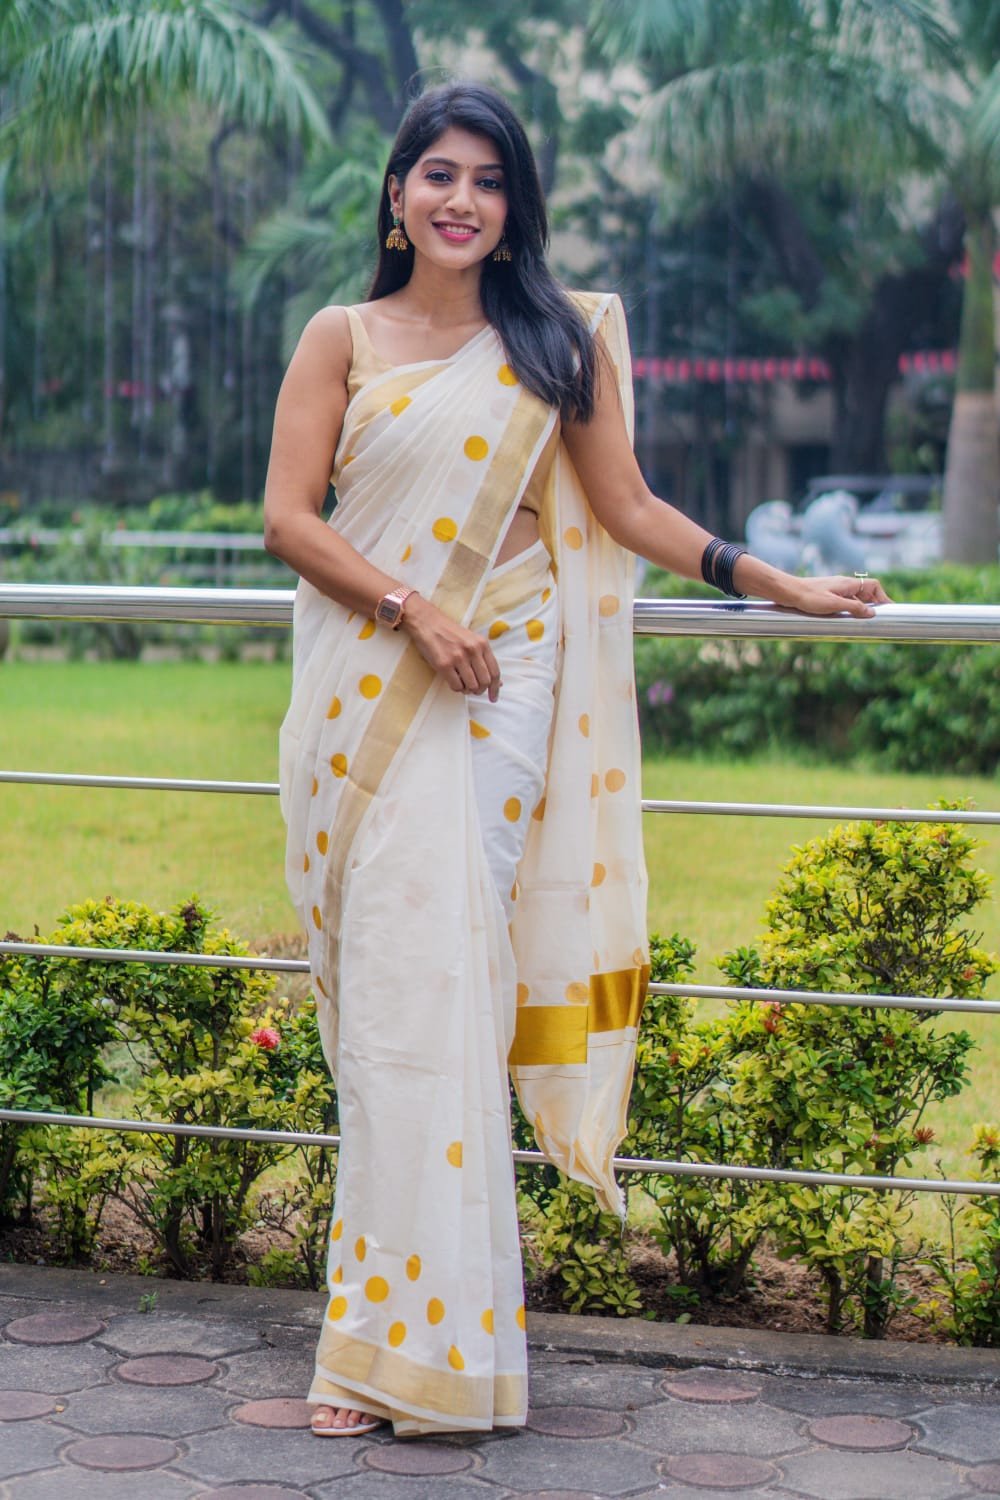 10 Kerala Saree Images That Prove This Outfit is the Ideal One